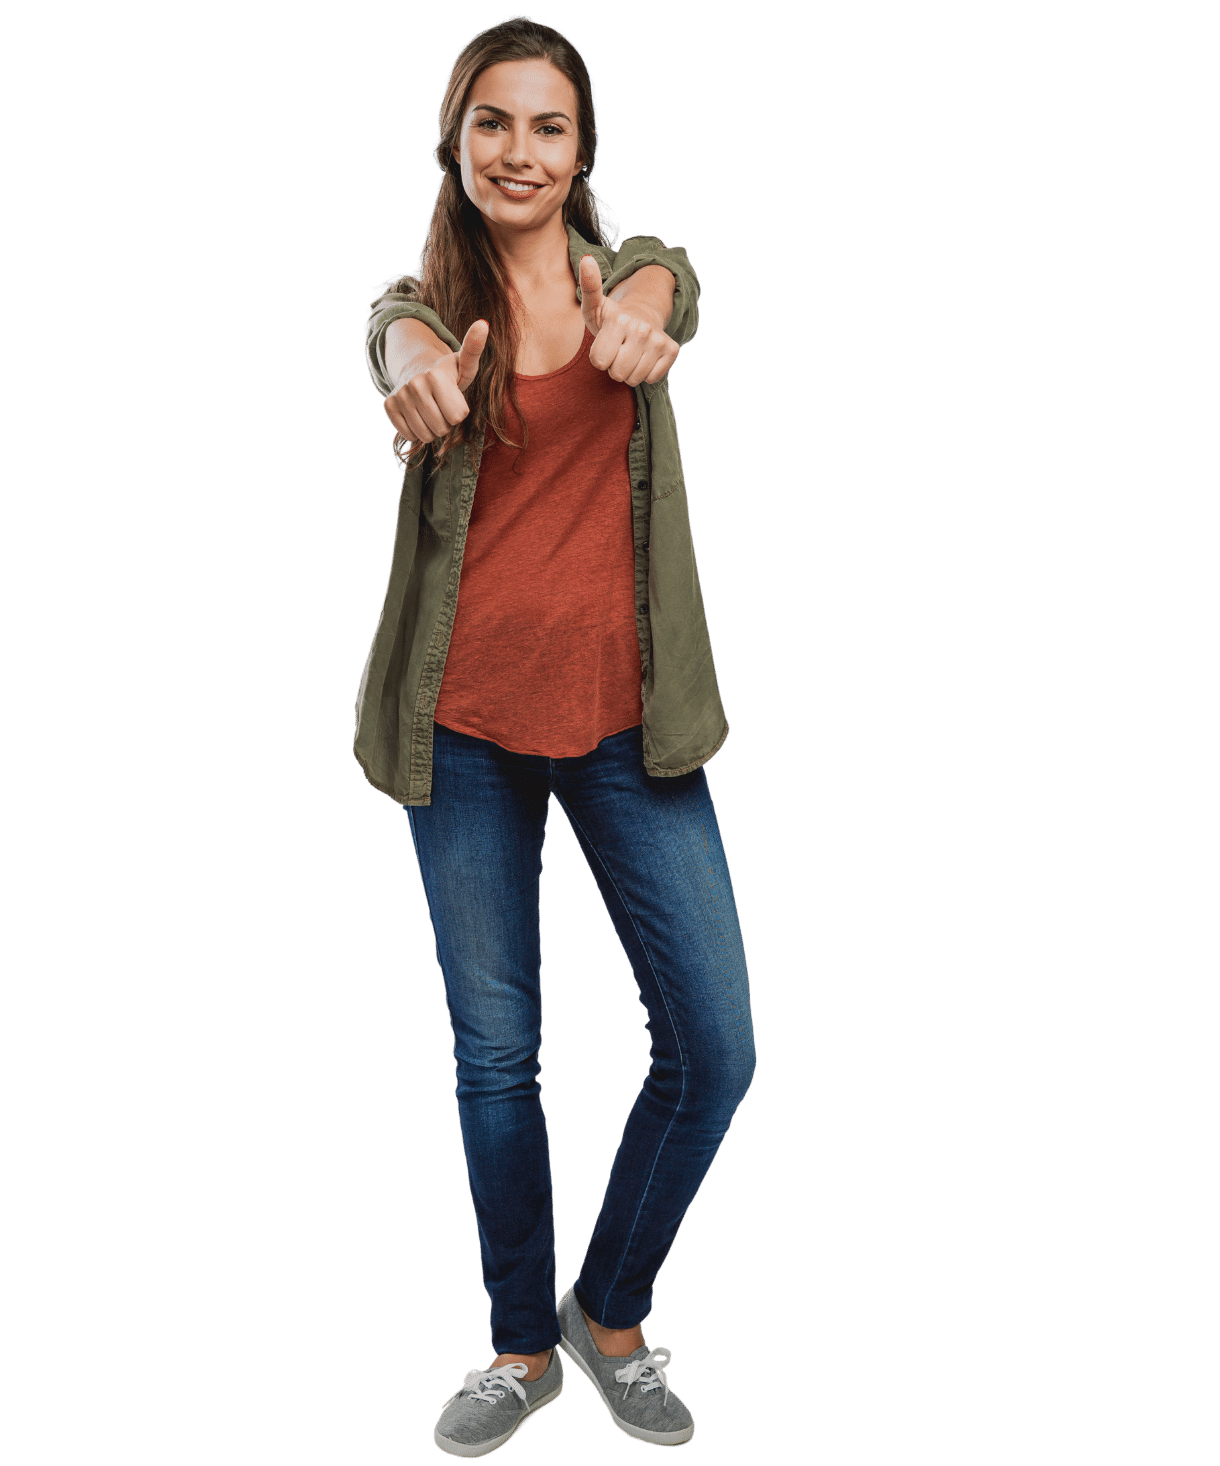 woman in green cardigan and orange shirt giving two thumbs up while smiling